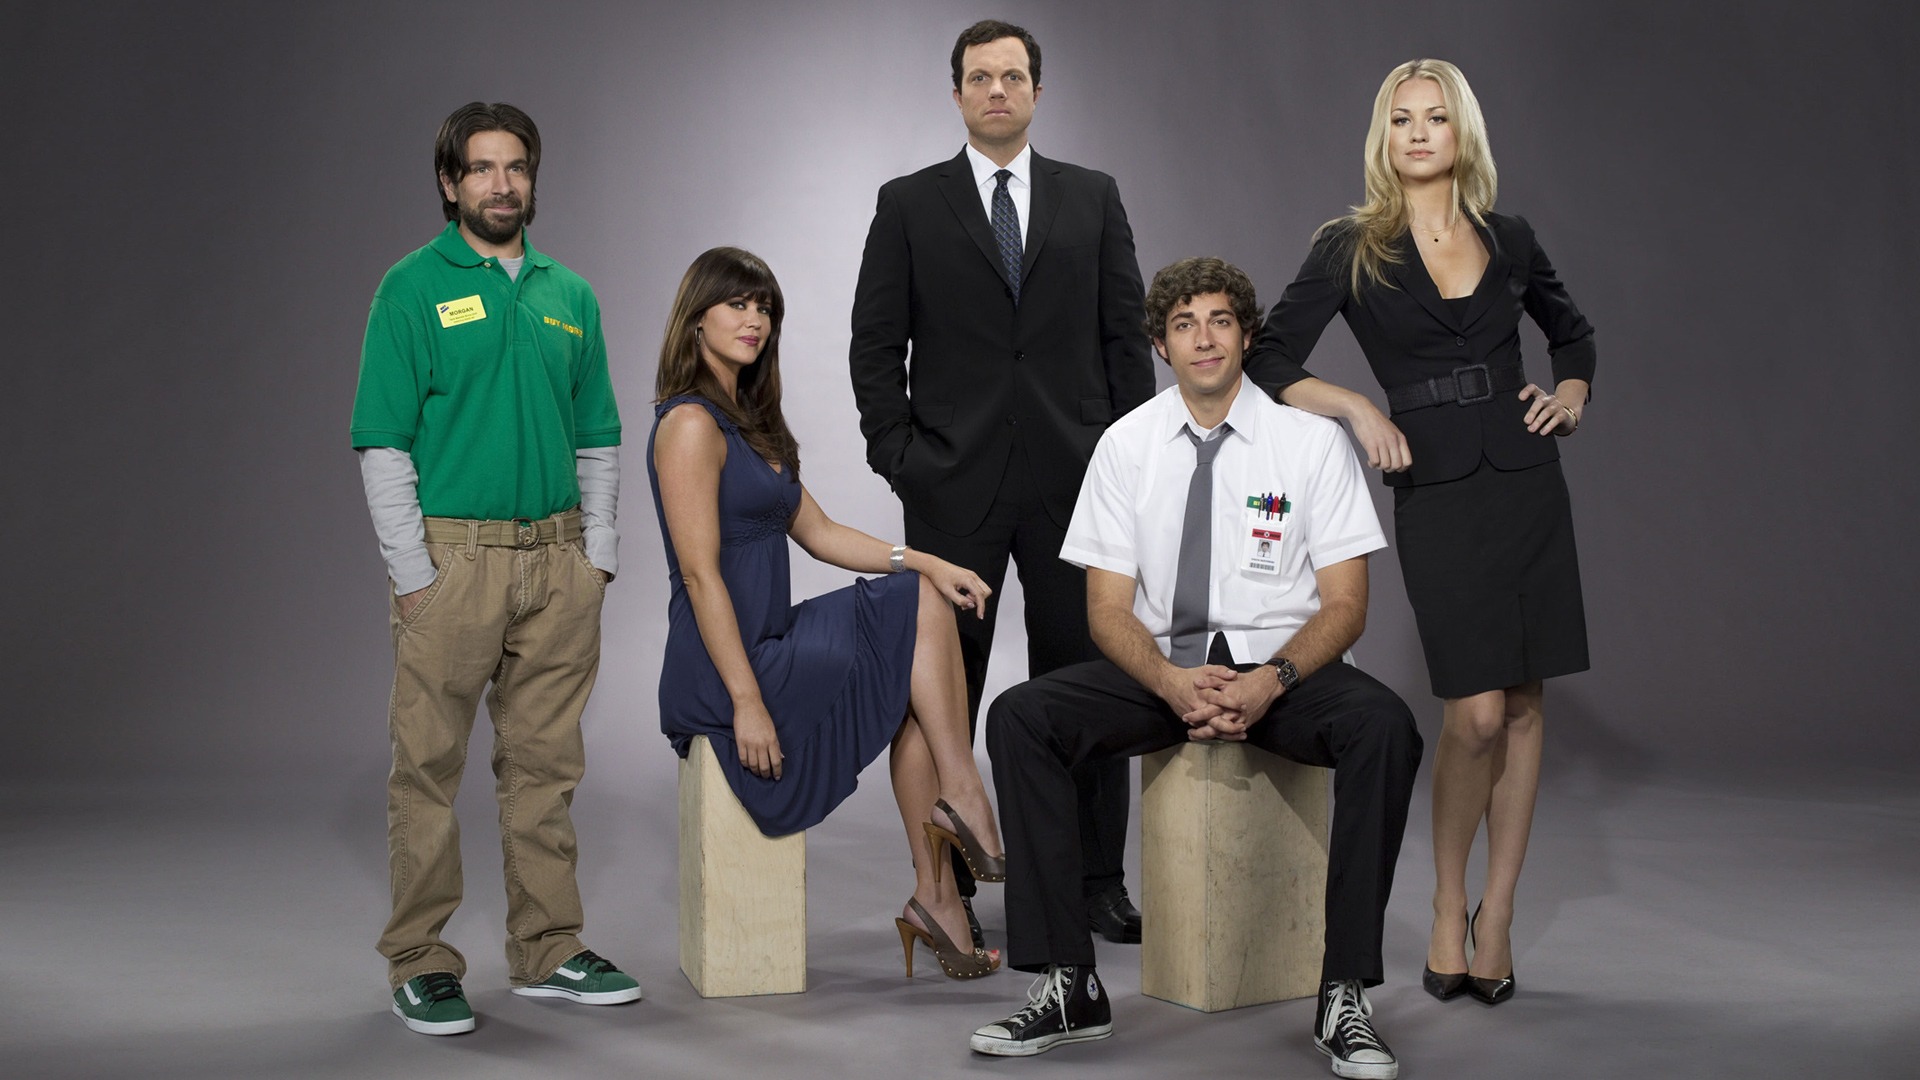 Chuck TV series Wallpaper Chuck Movies Wallpapers in jpg format for